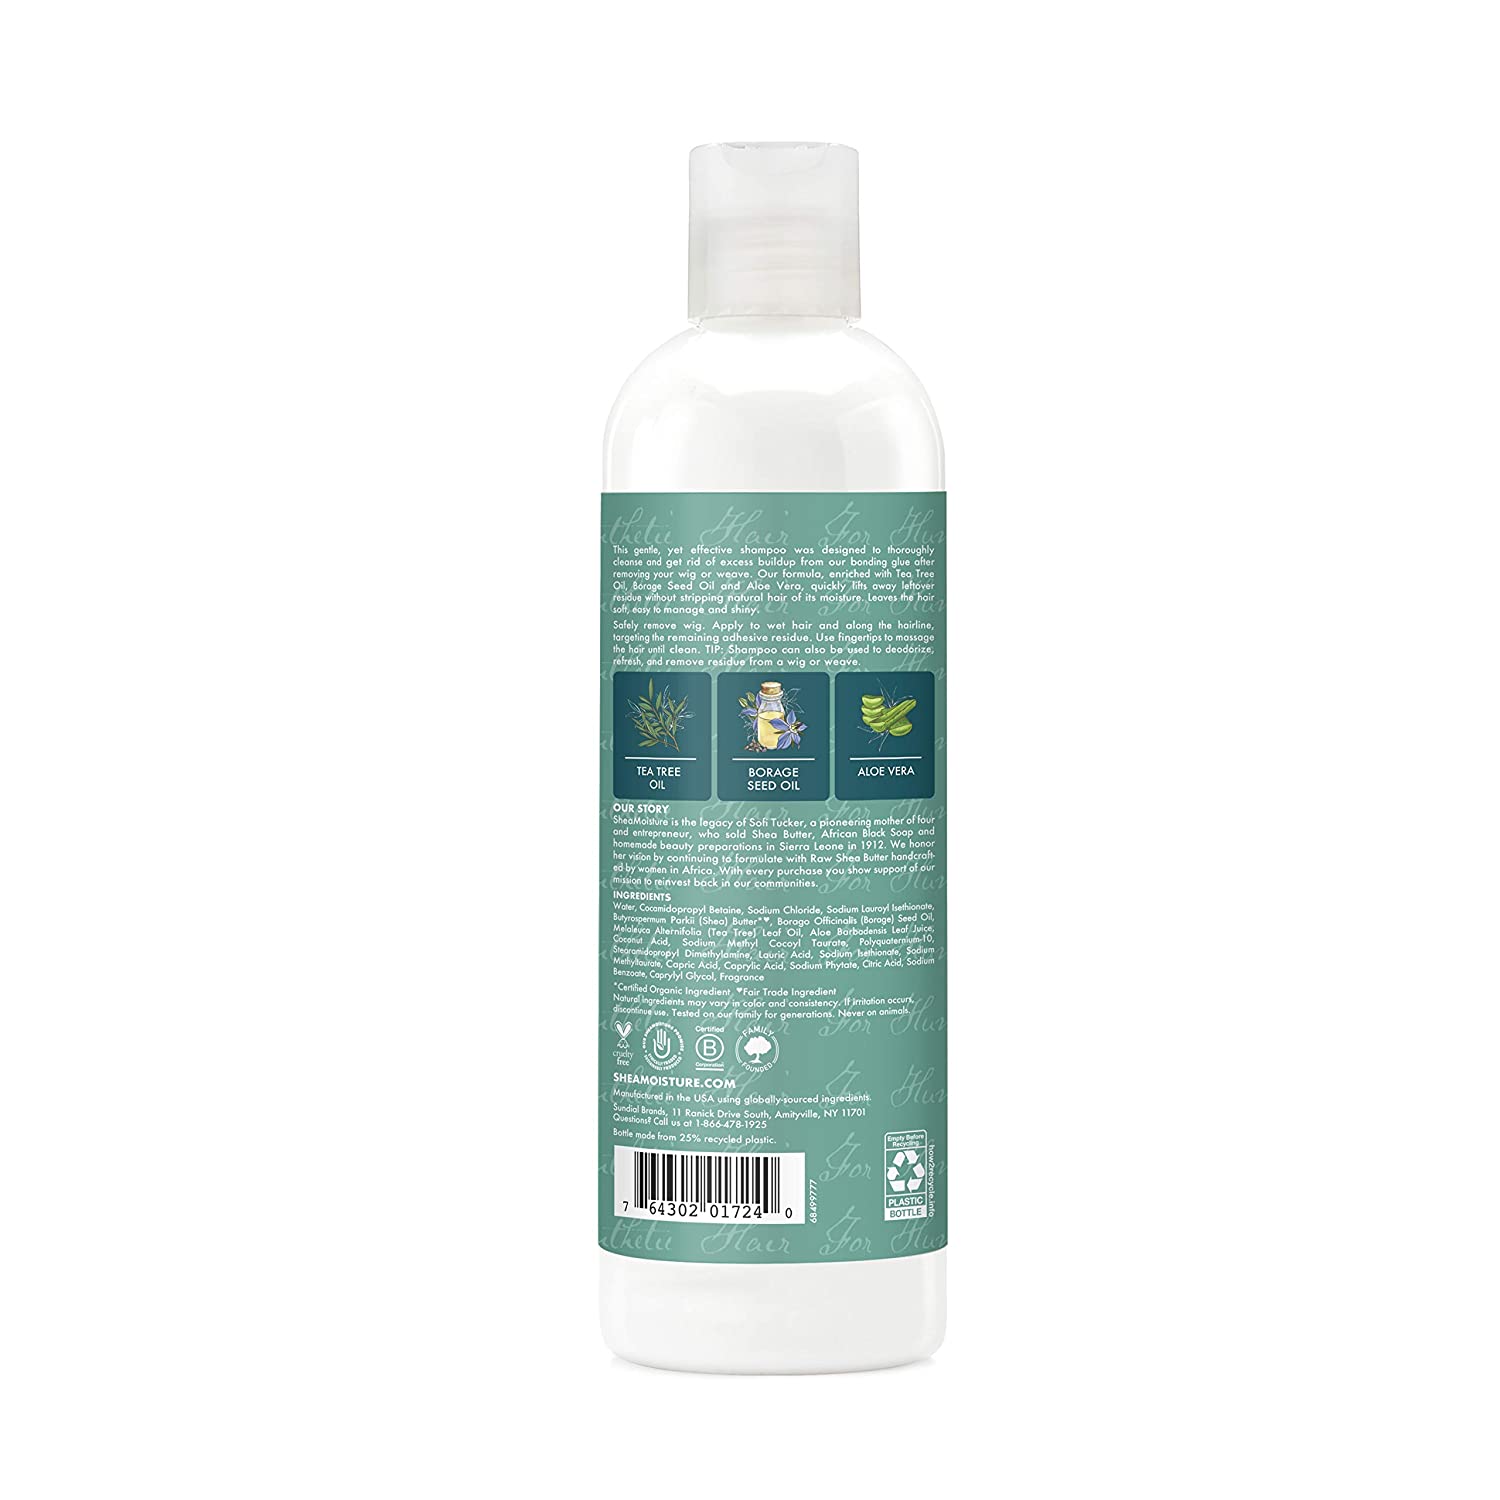 SHEA MOISTURE Wave And Wig For Human & Synthetic Hair Residue Remover Shampoo With Aloe Vera